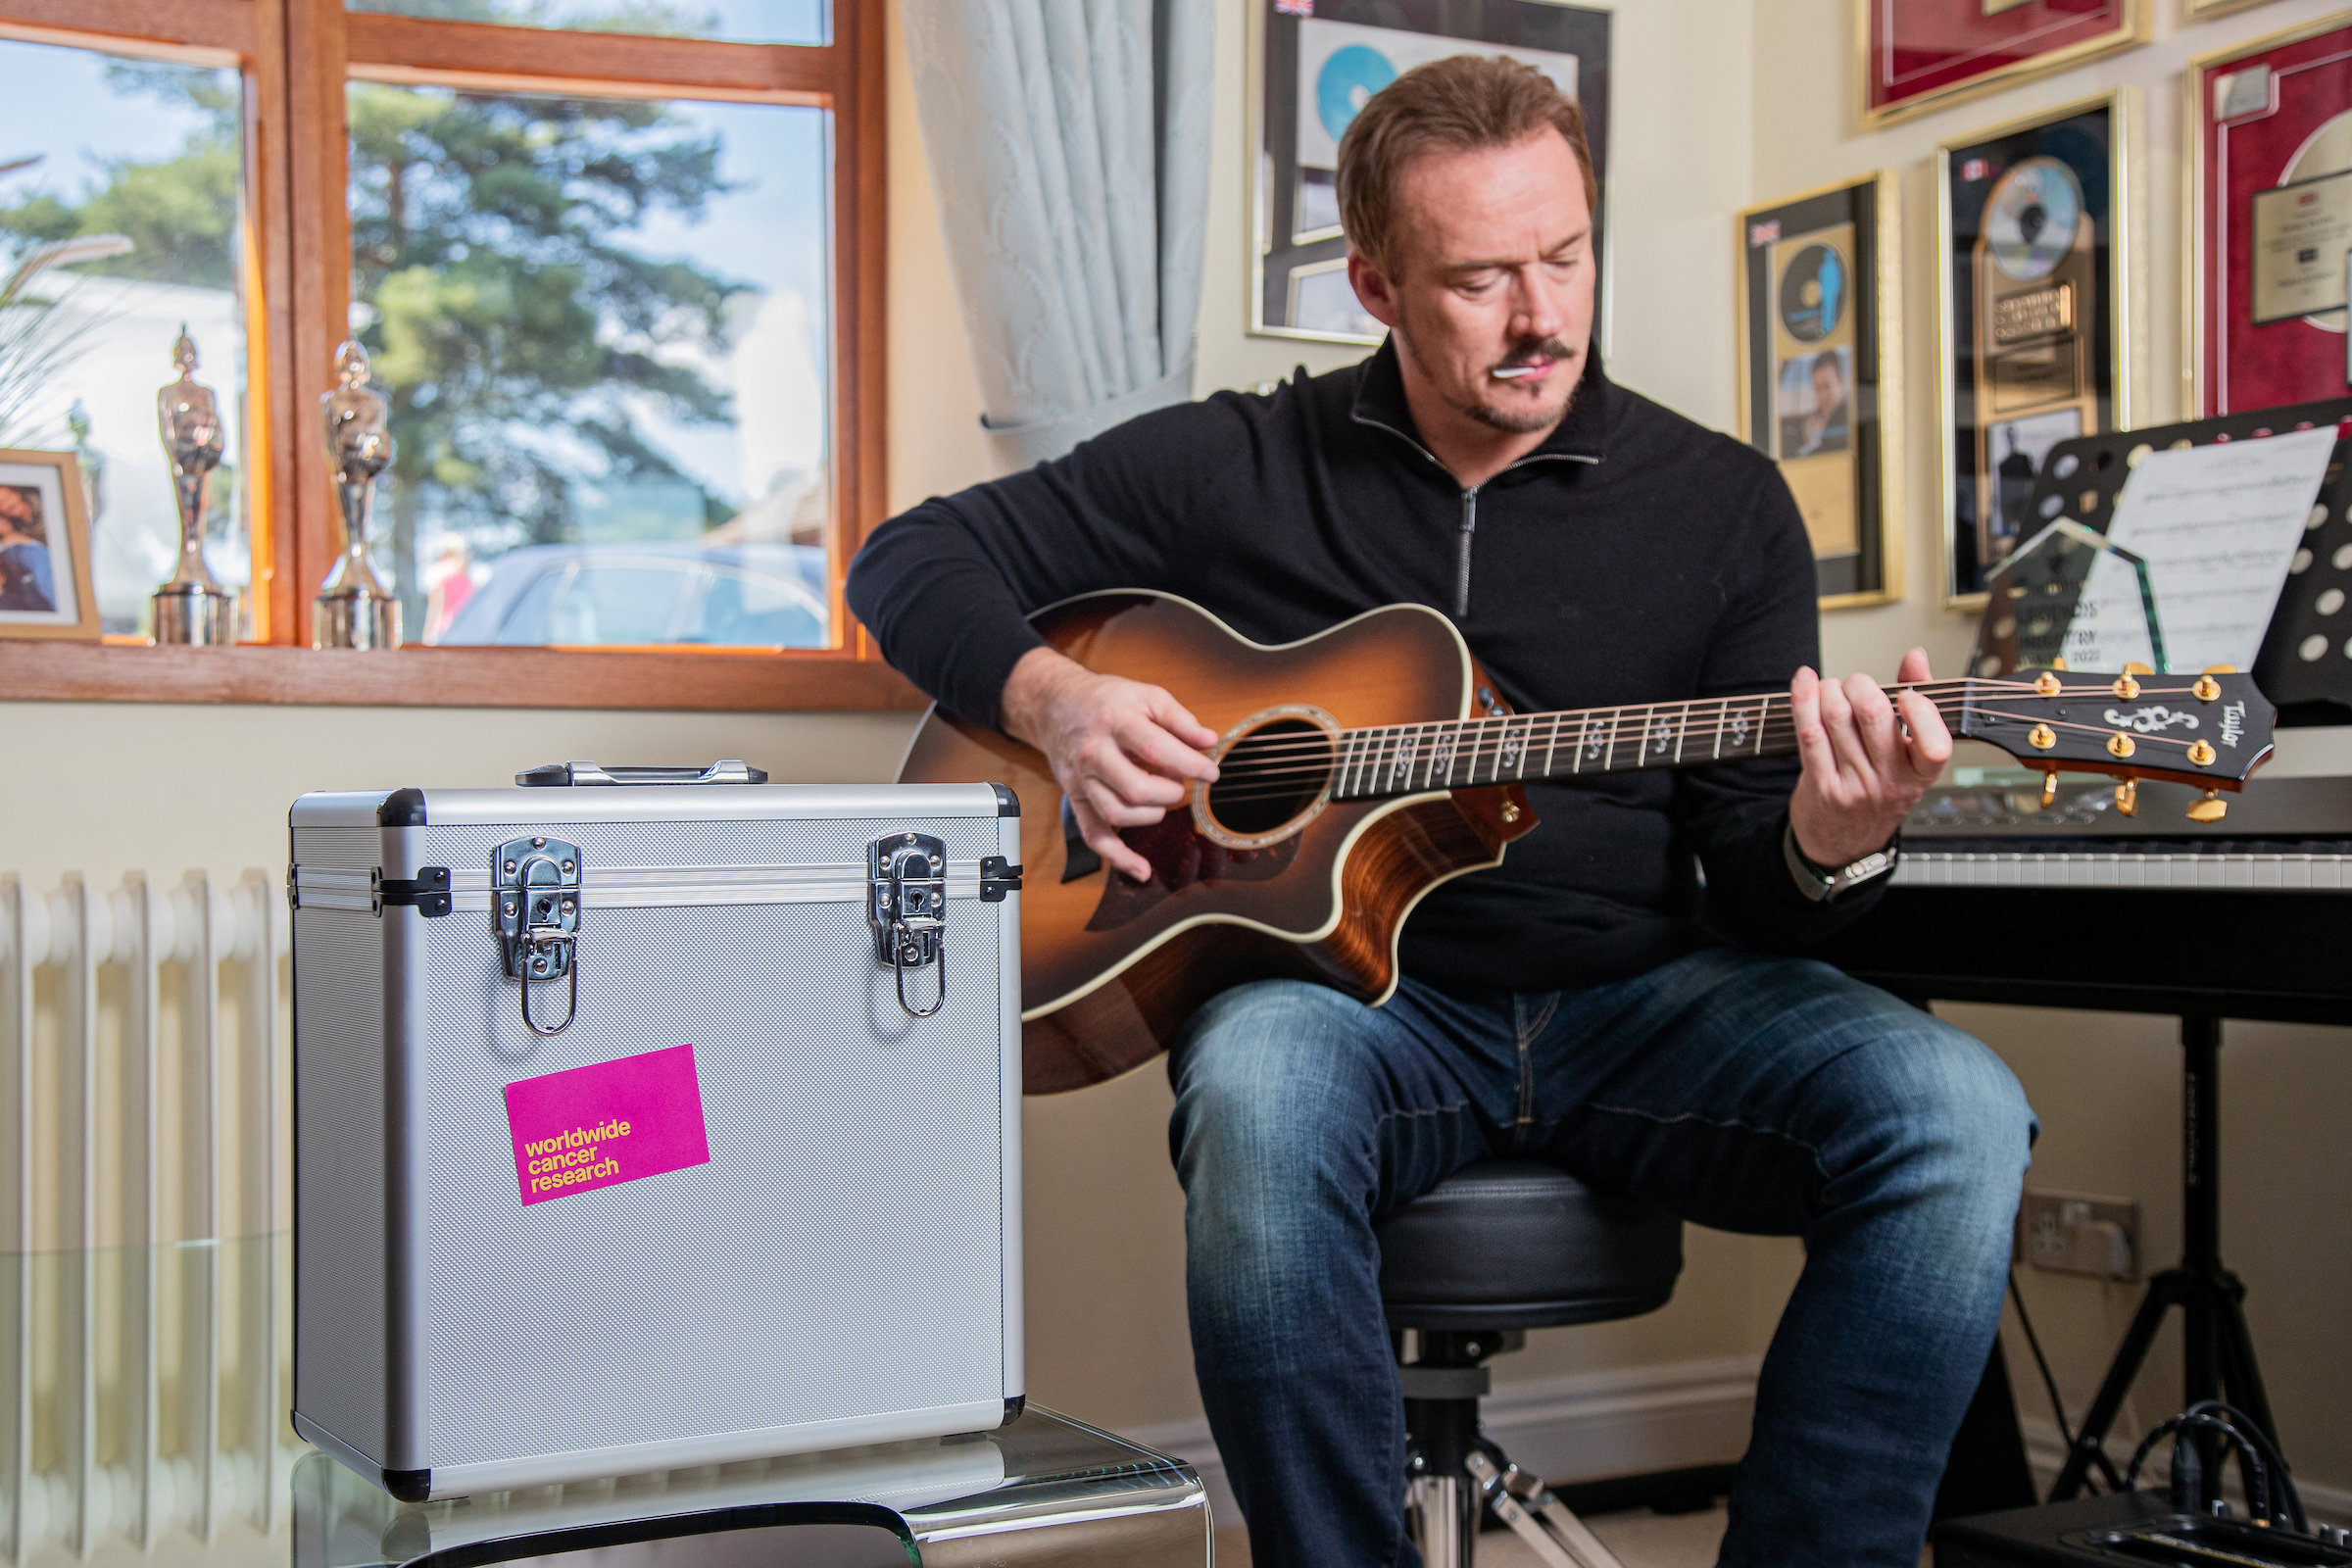 Singer Russell Watson playing guitar next to a silver record case with the Worldwide Cancer Research logo on